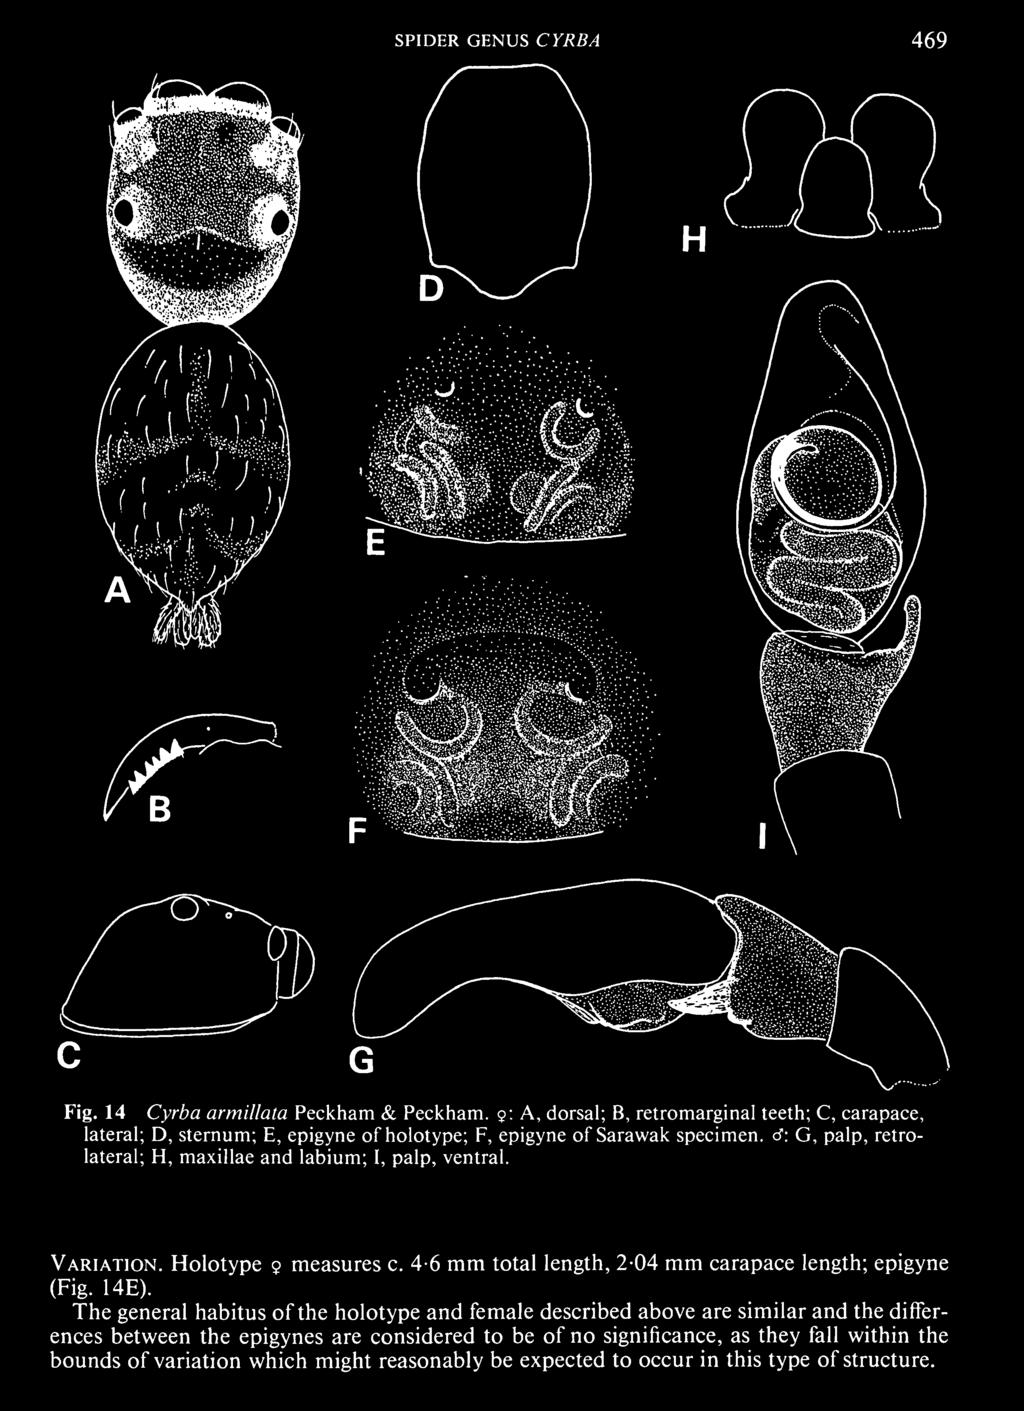 The general habitus of the holotype and female described above are similar and the differences between